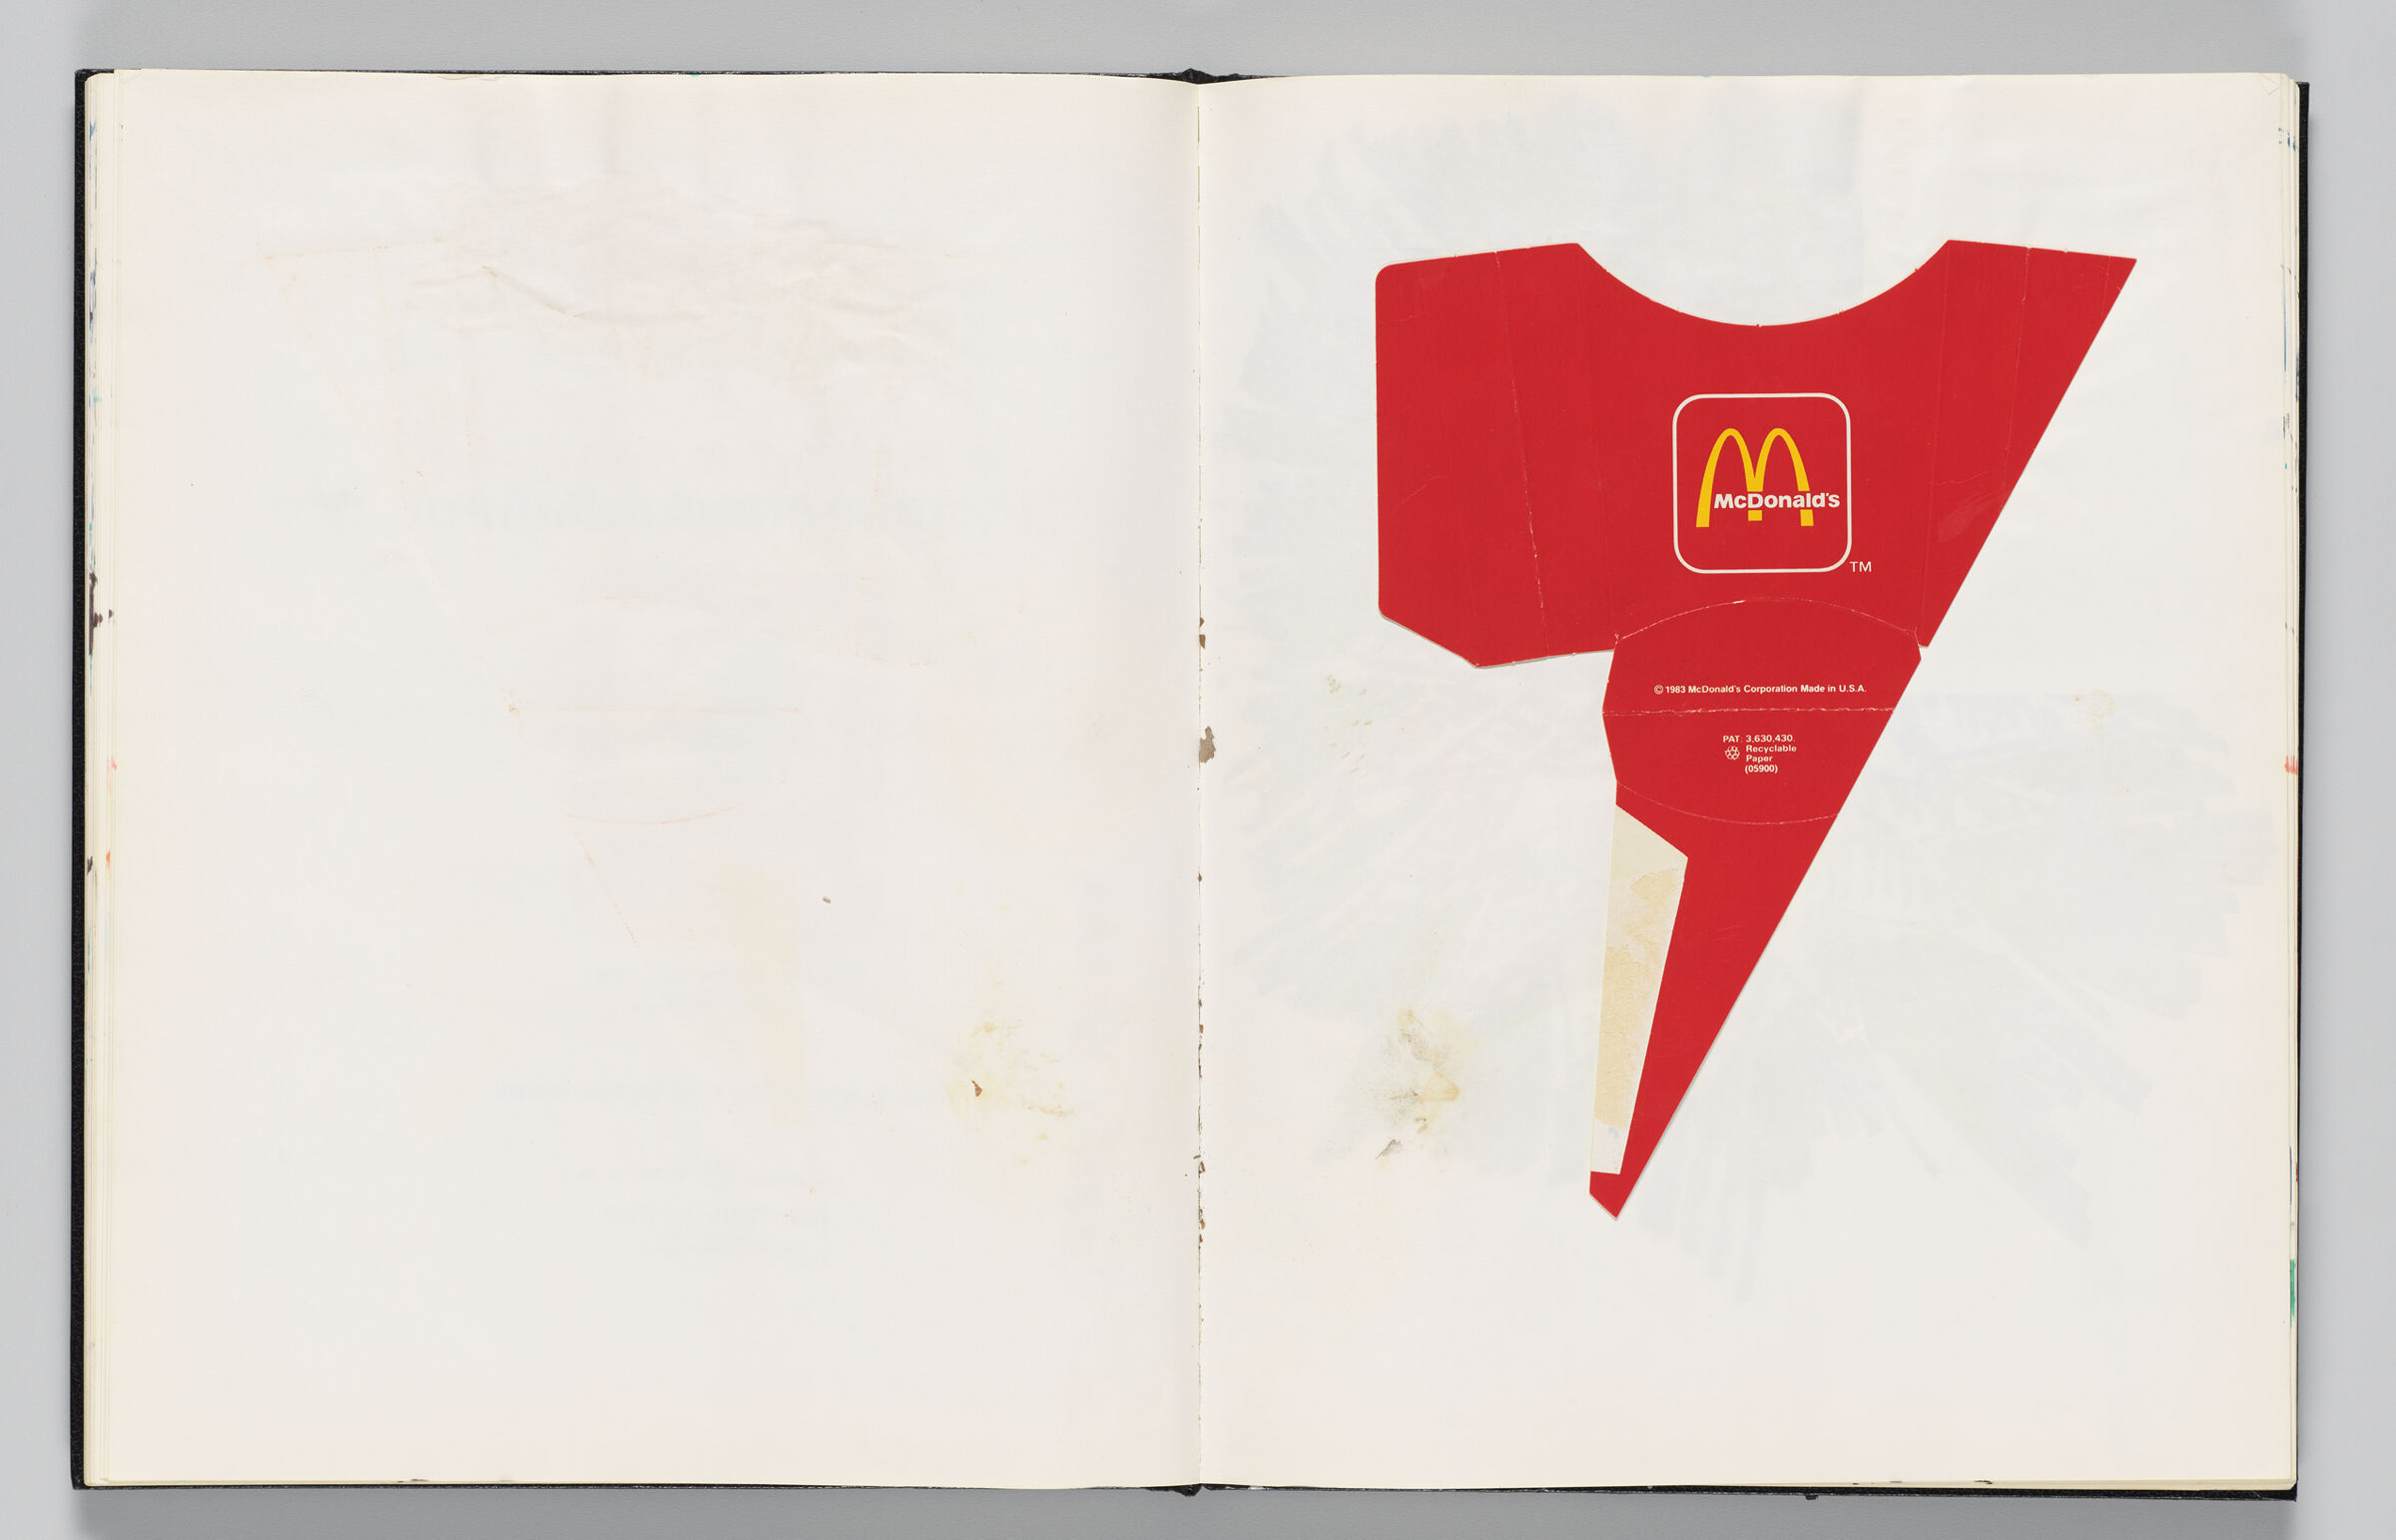 Untitled (Bleed-Through Of Previous Page, Left Page); Untitled (Adhered Mcdonald's French Fry Box, Right Page)